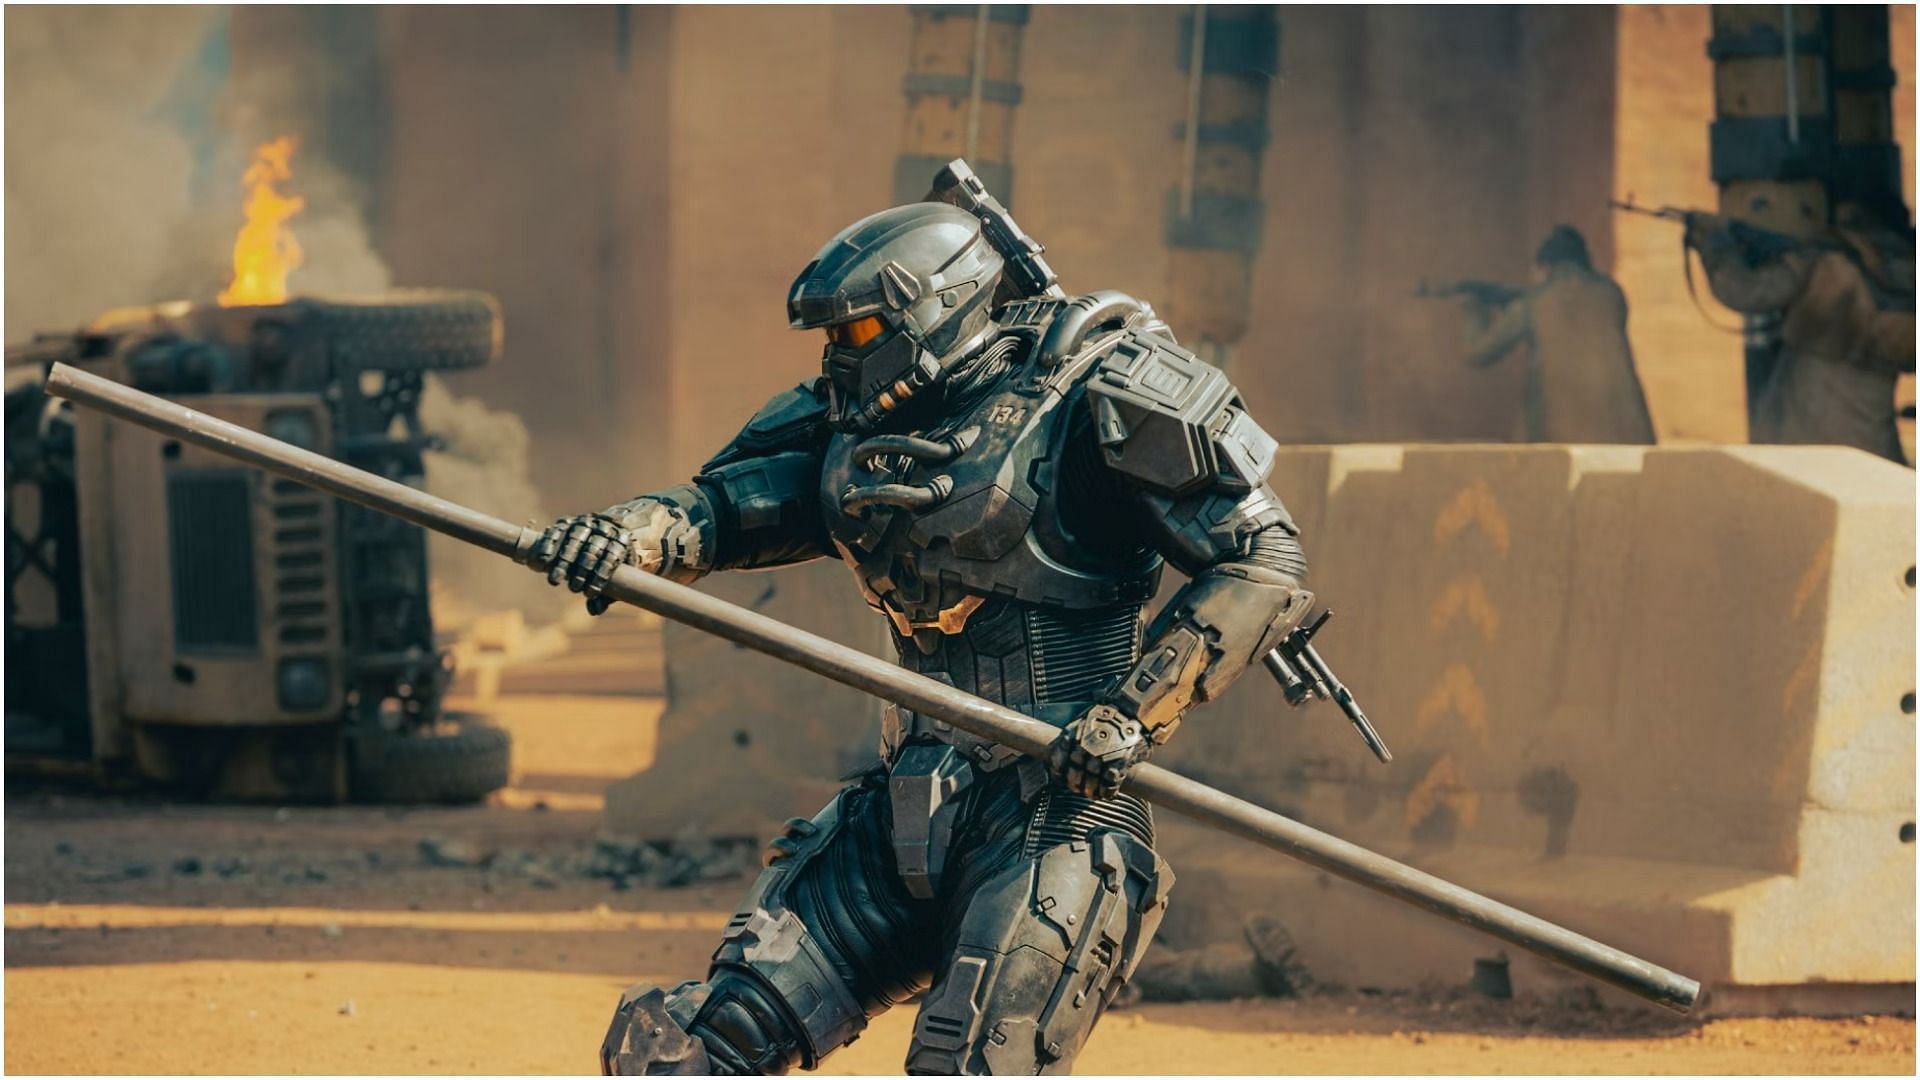 Halo TV series: Is the Paramount+ adaption worth watching?